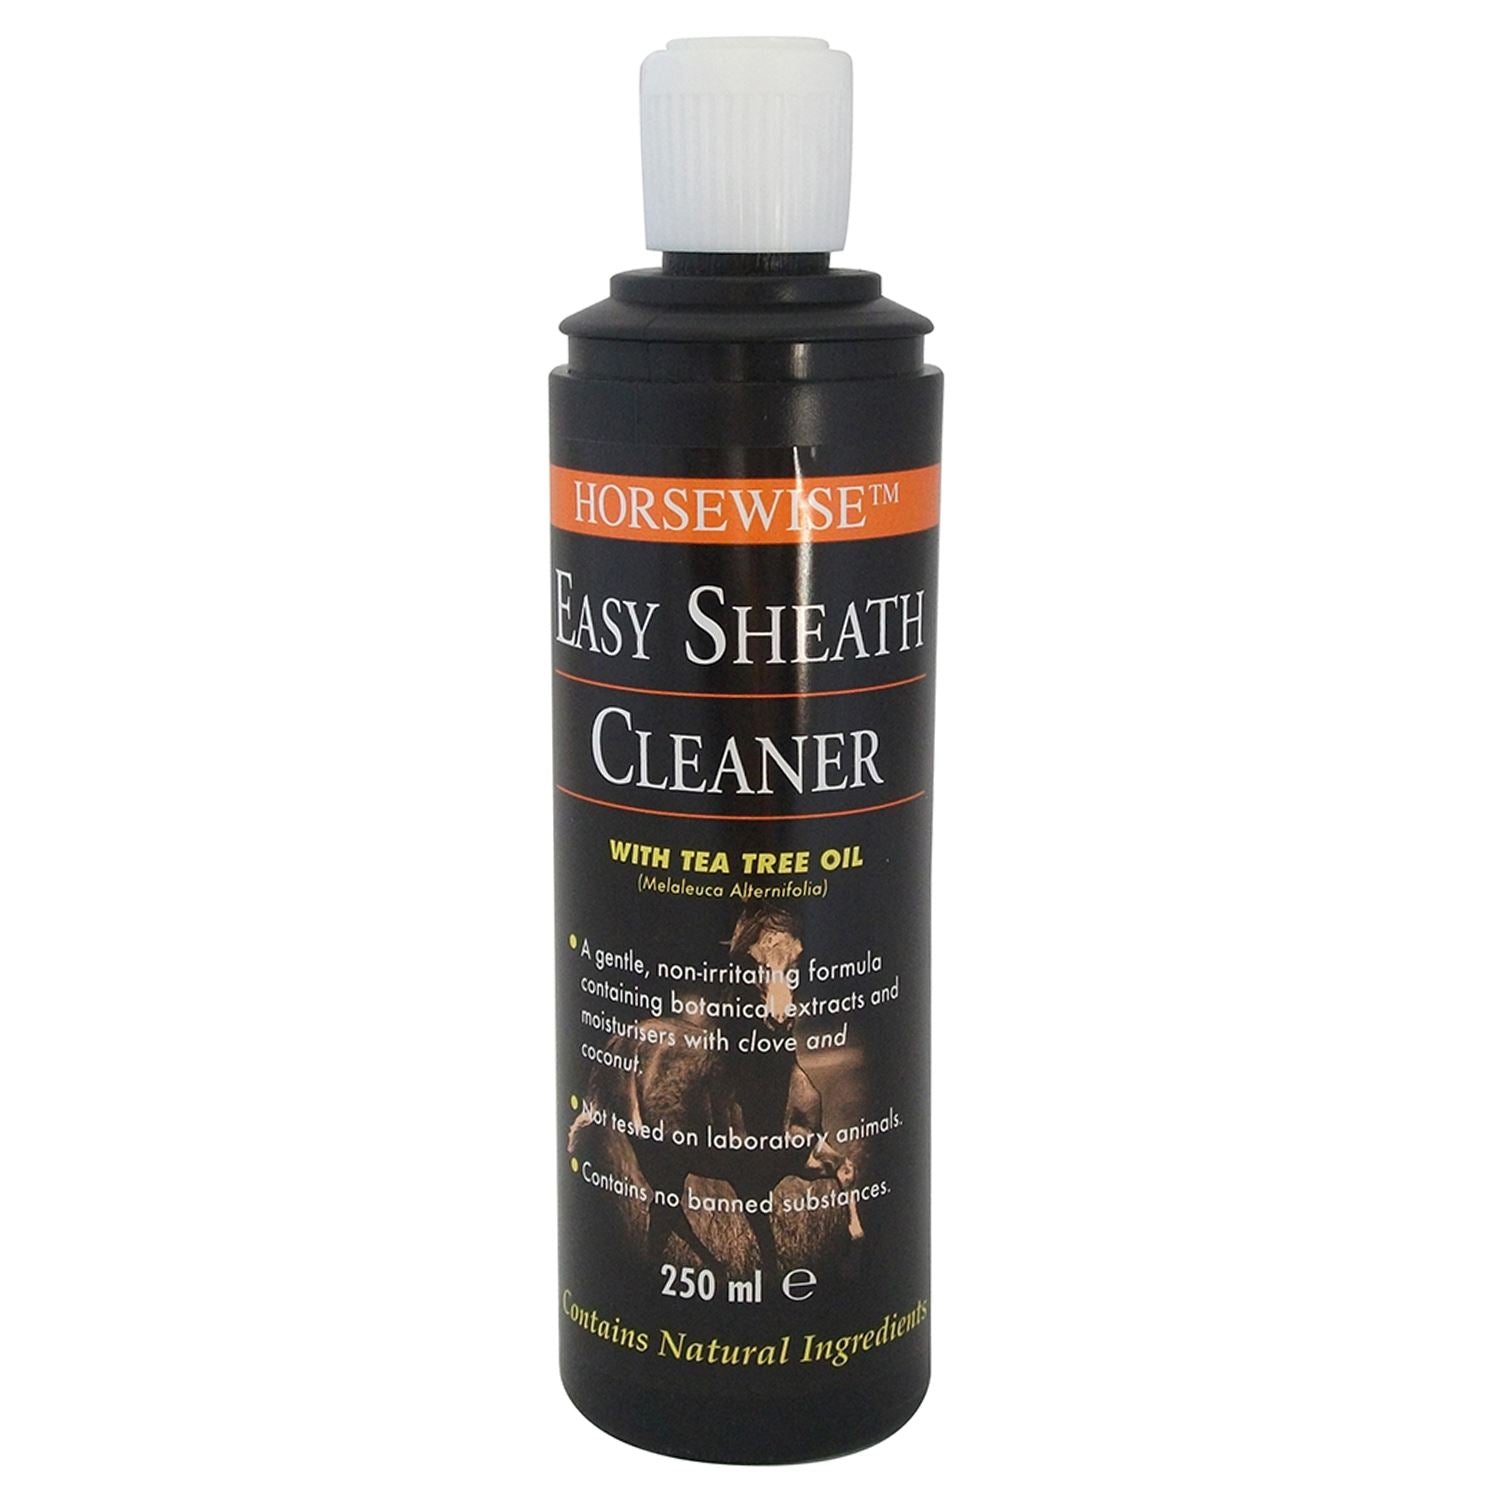 Horsewise Easy Sheath Cleaner - Just Horse Riders